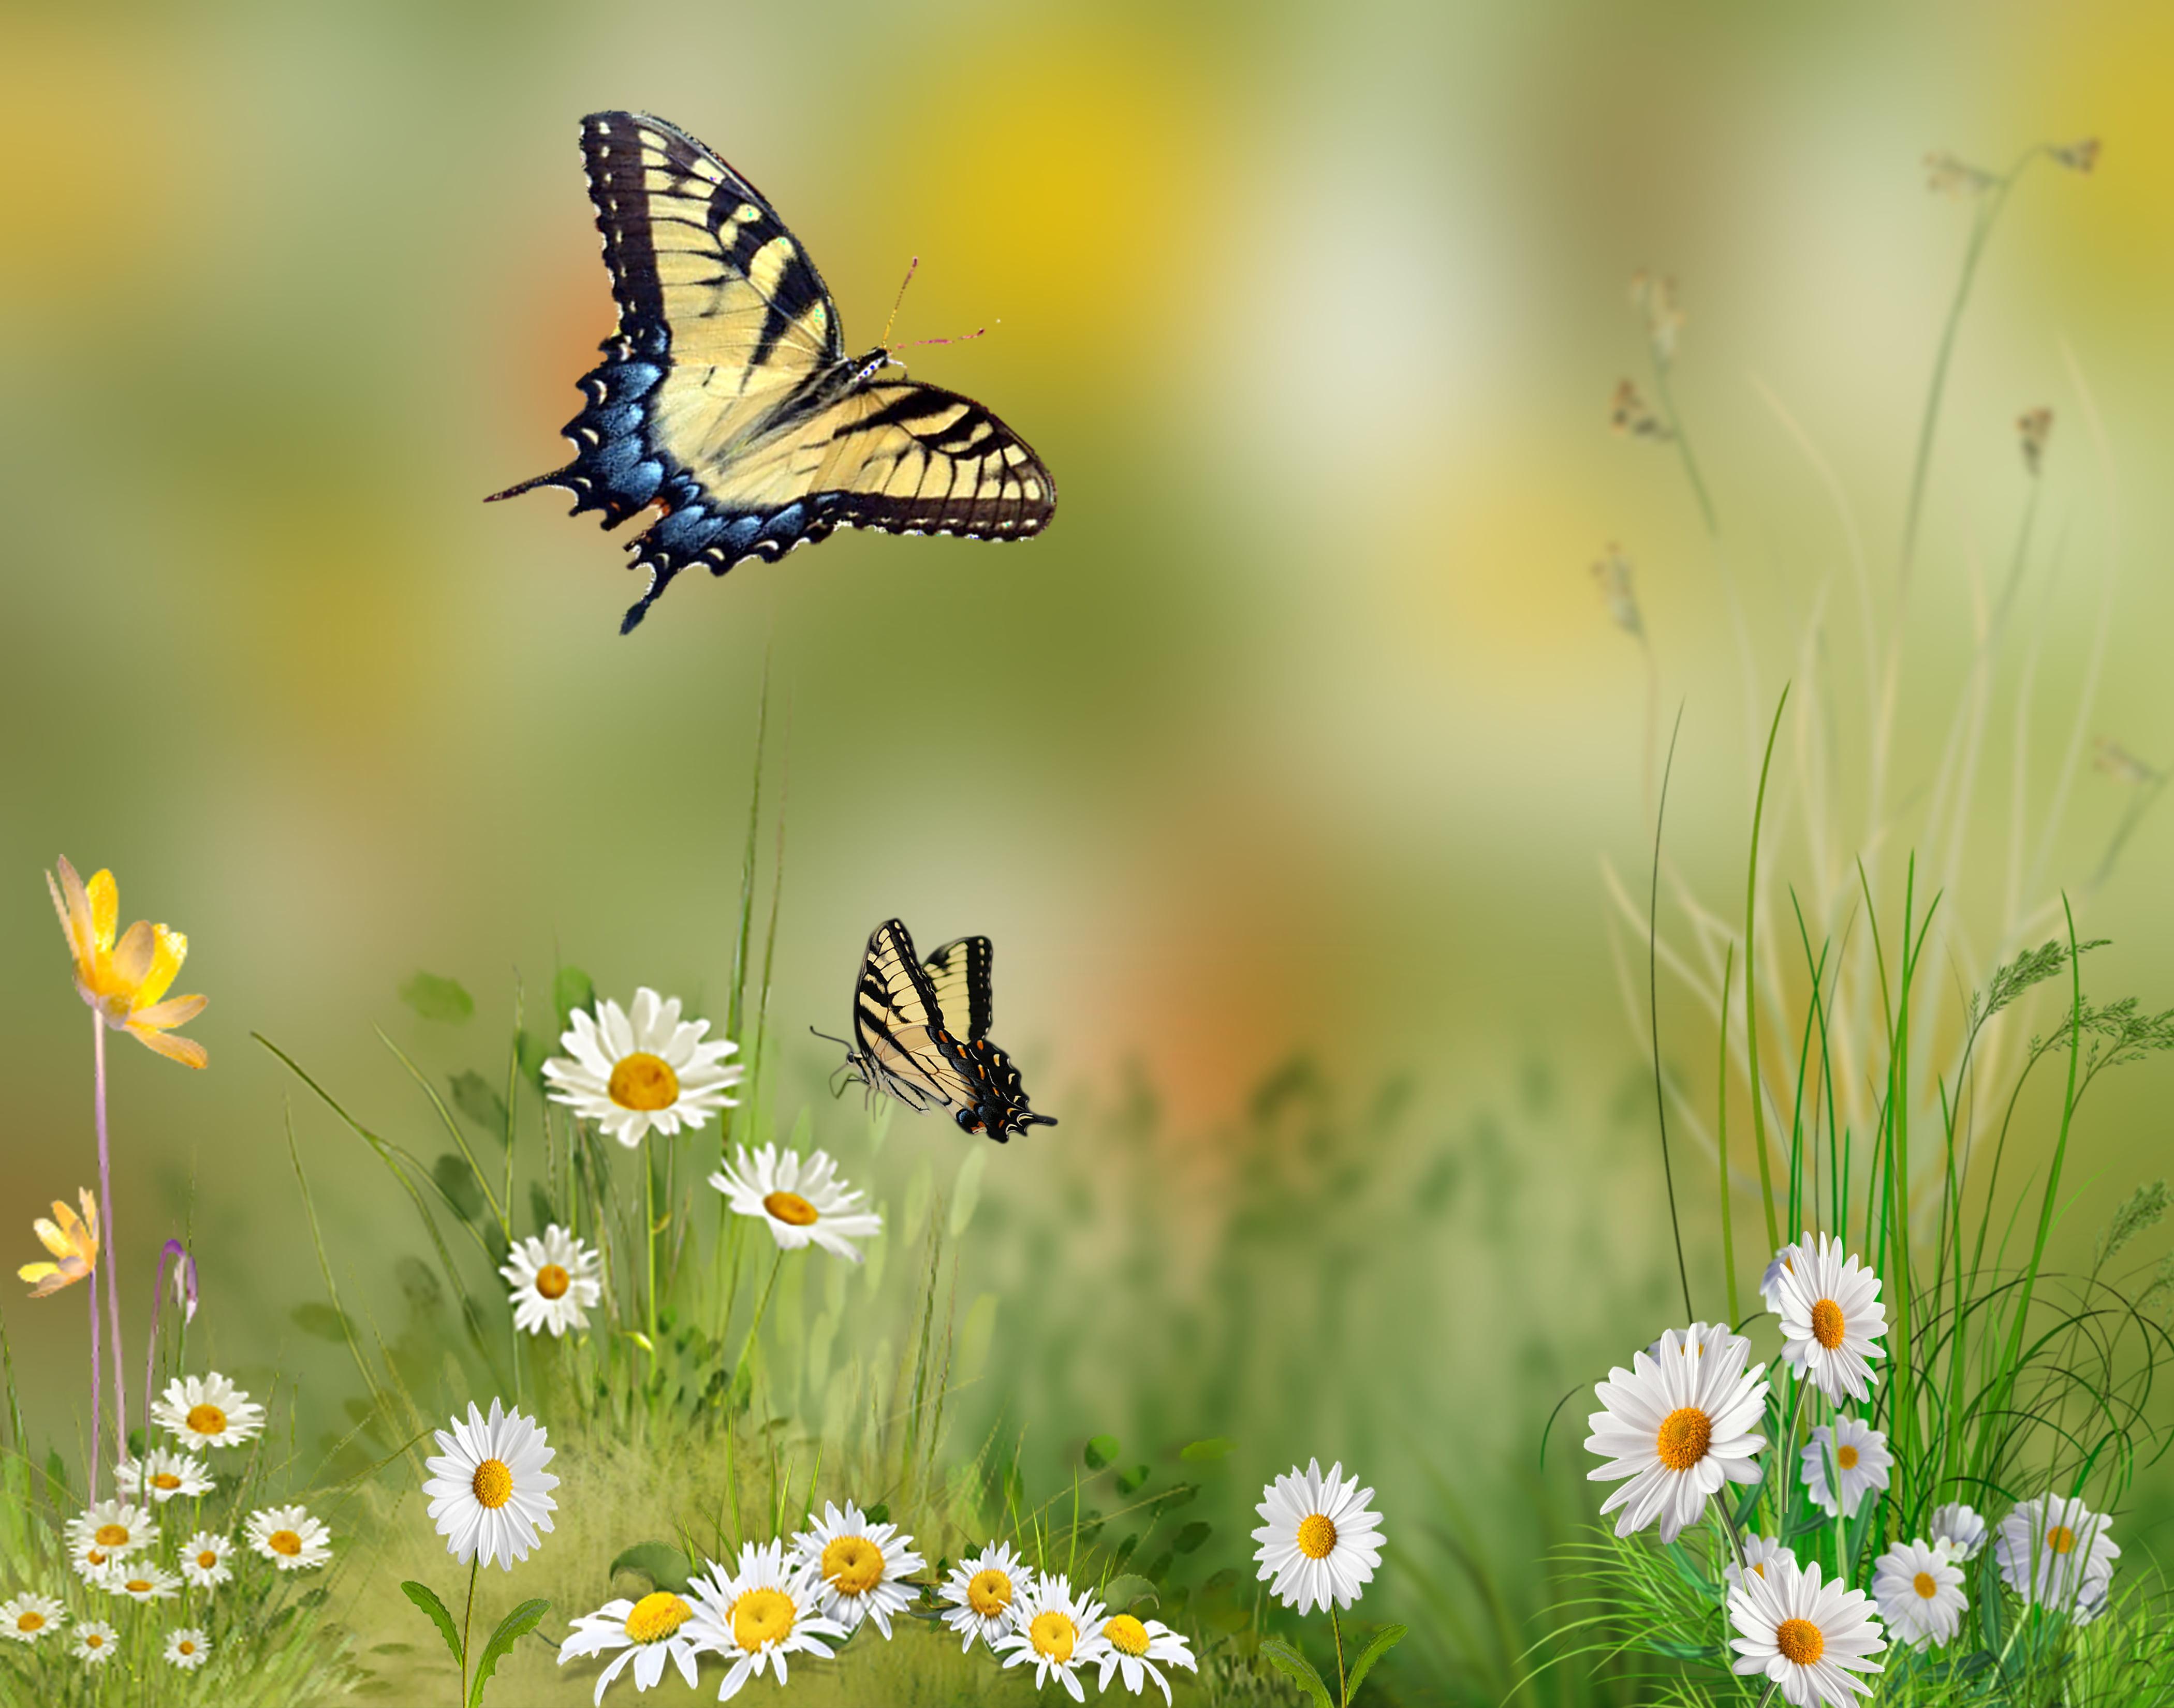 Two Tiger Swallowtail butterflies hovering over white daisy